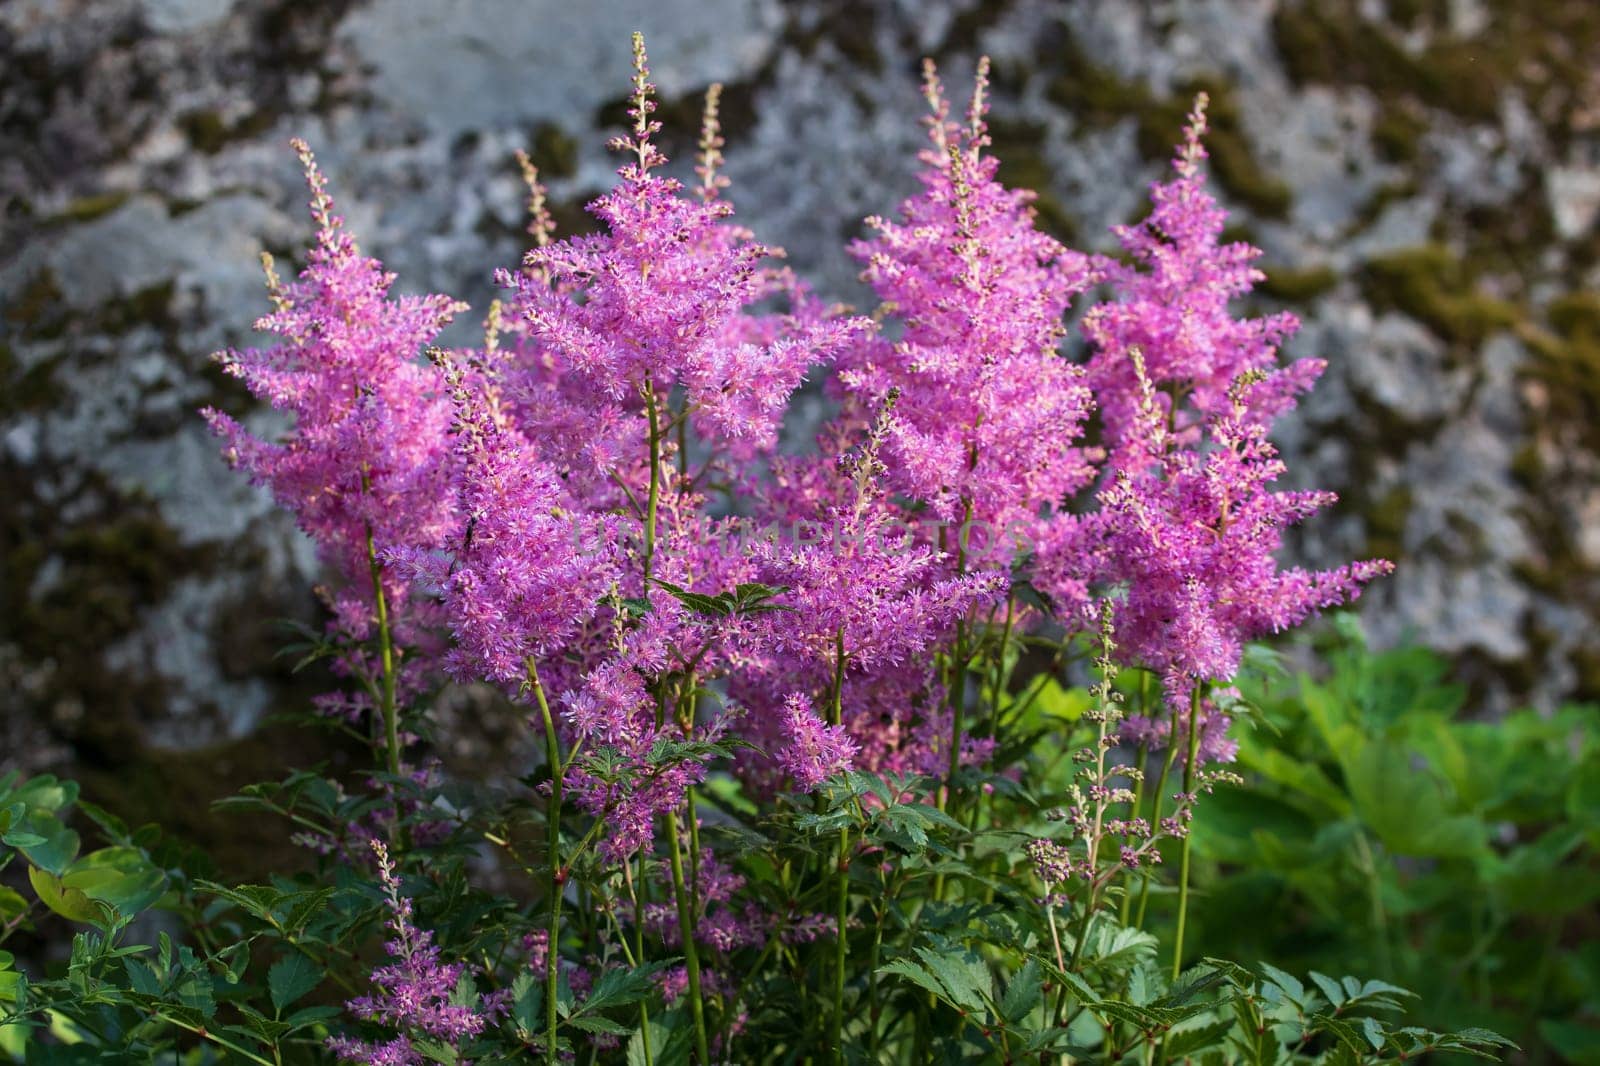 Blooming pink astilbes in a flower bed in the garden by galsand